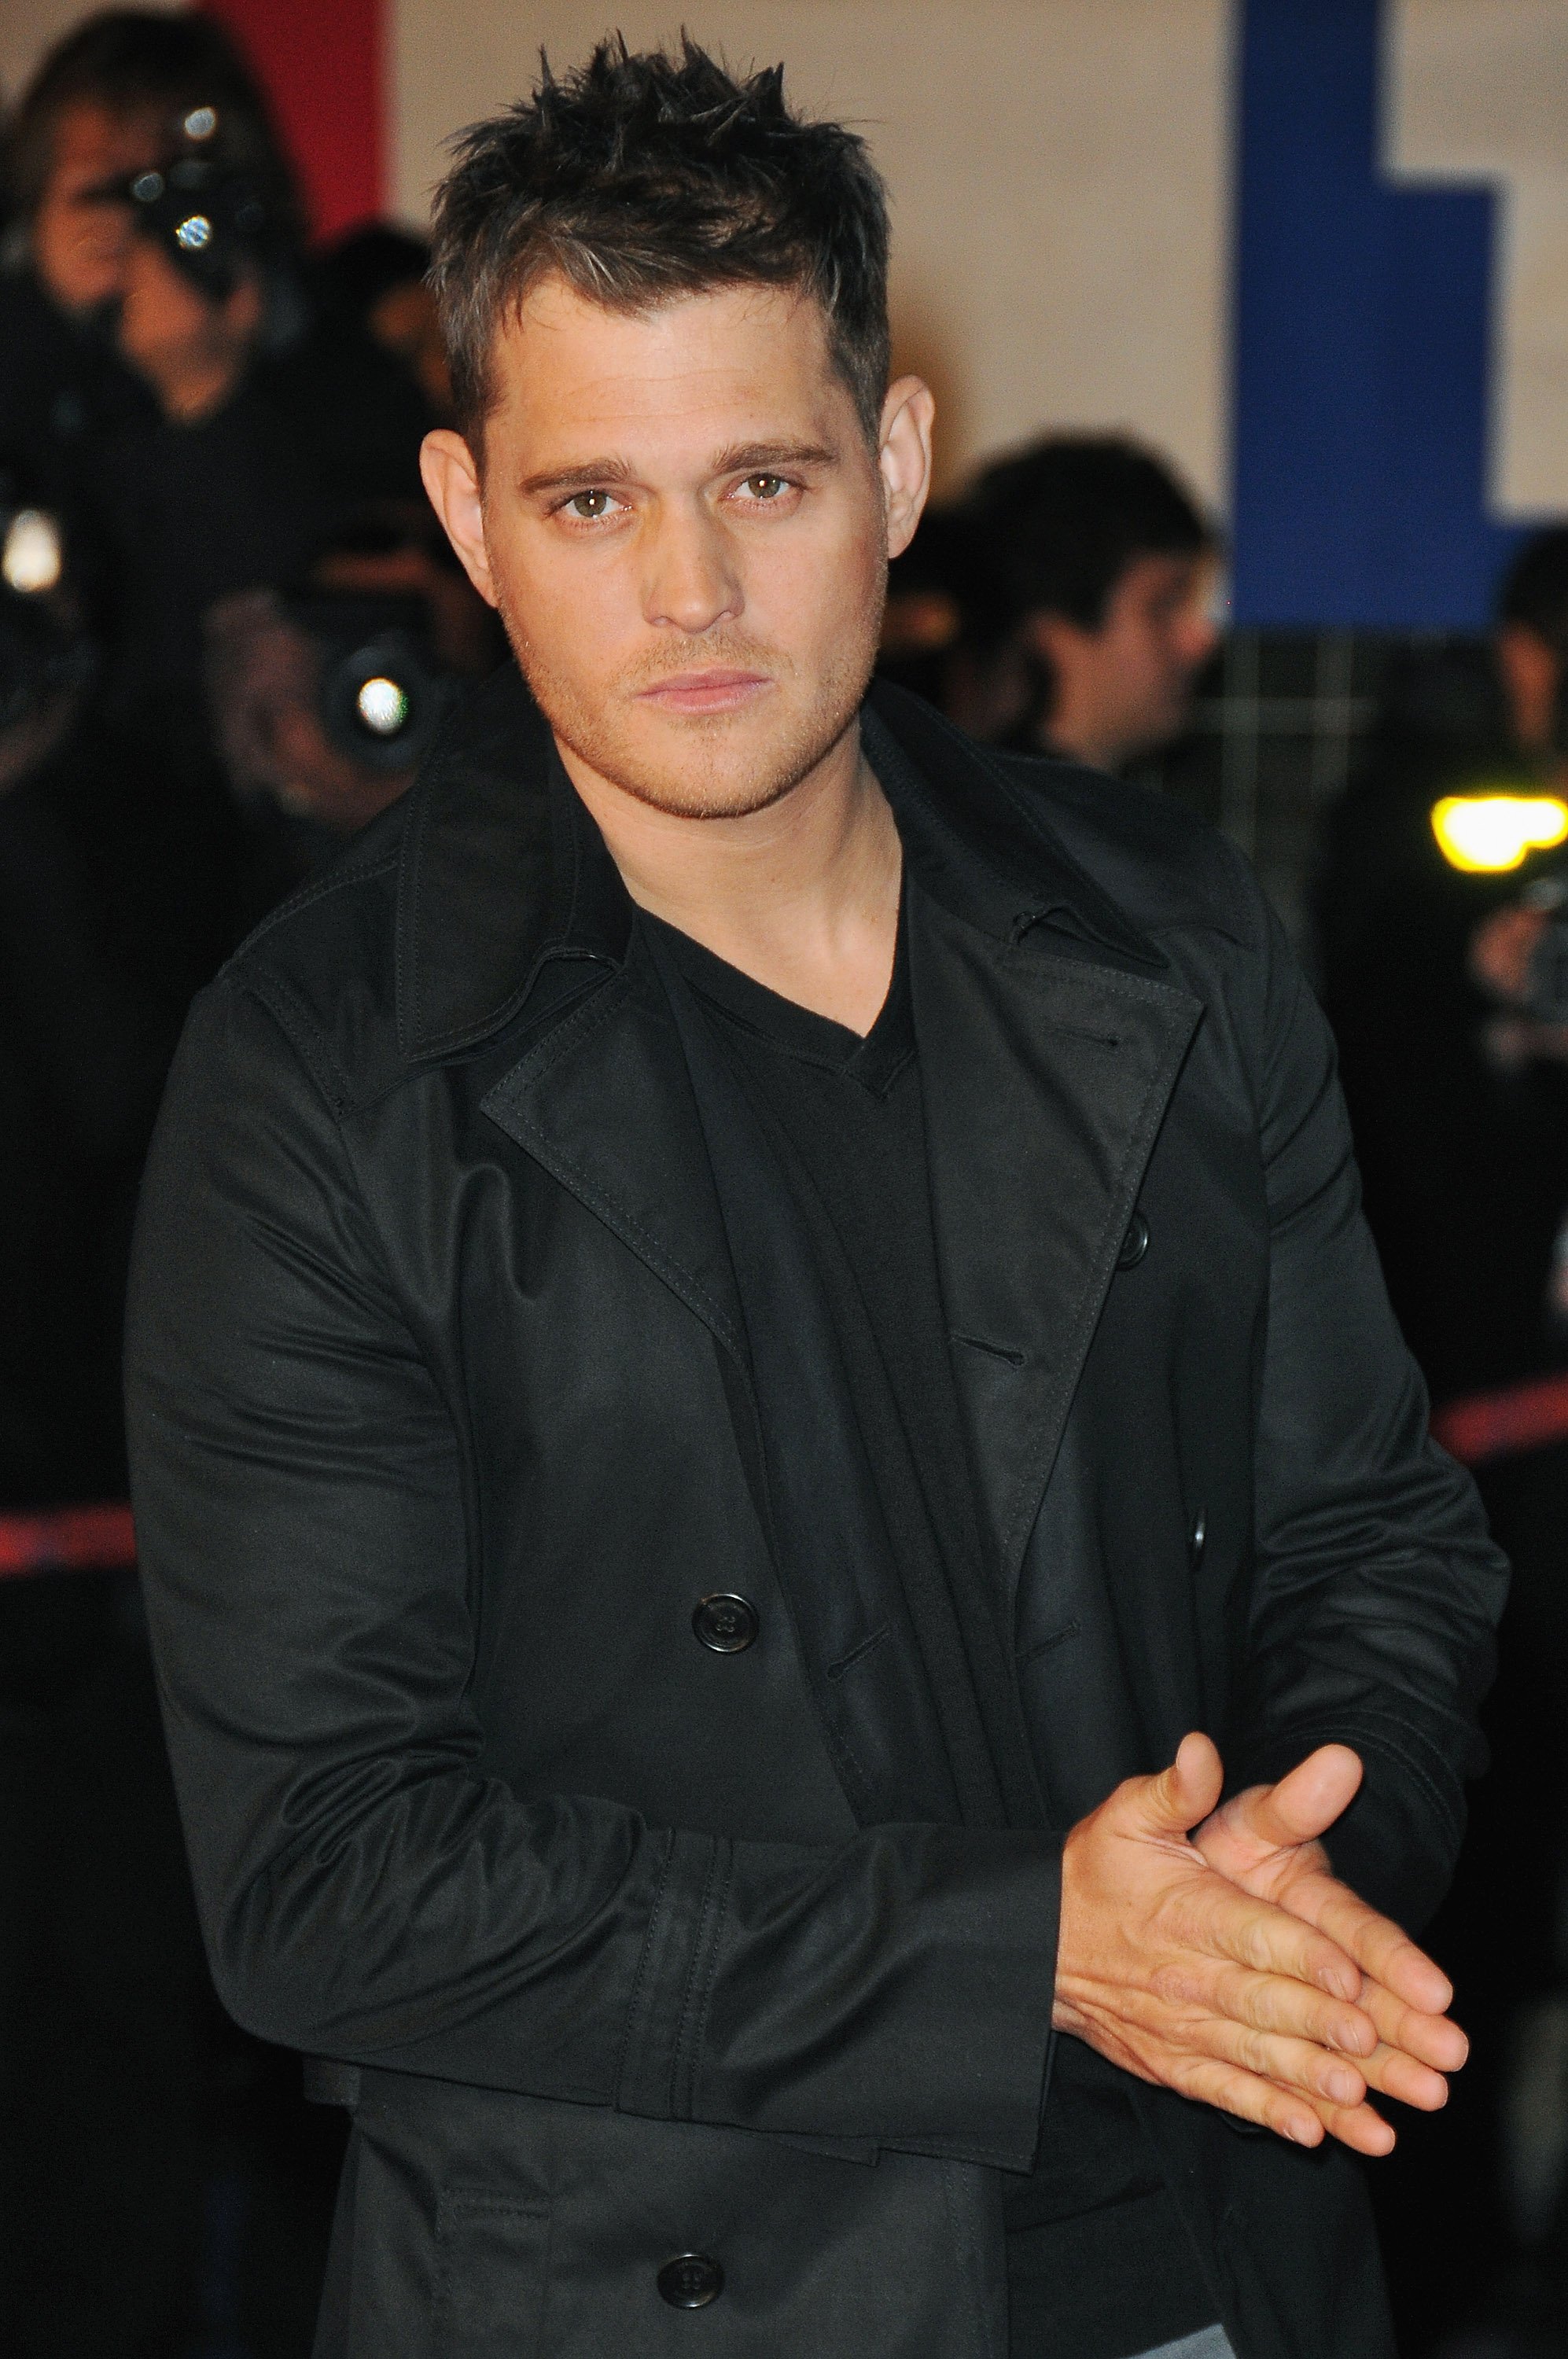 Pop star Michael Buble attends the NRJ Music Awards 2010 at Palais des Festivals on January 23, 2010 in Cannes, France | Photo: Getty Images 